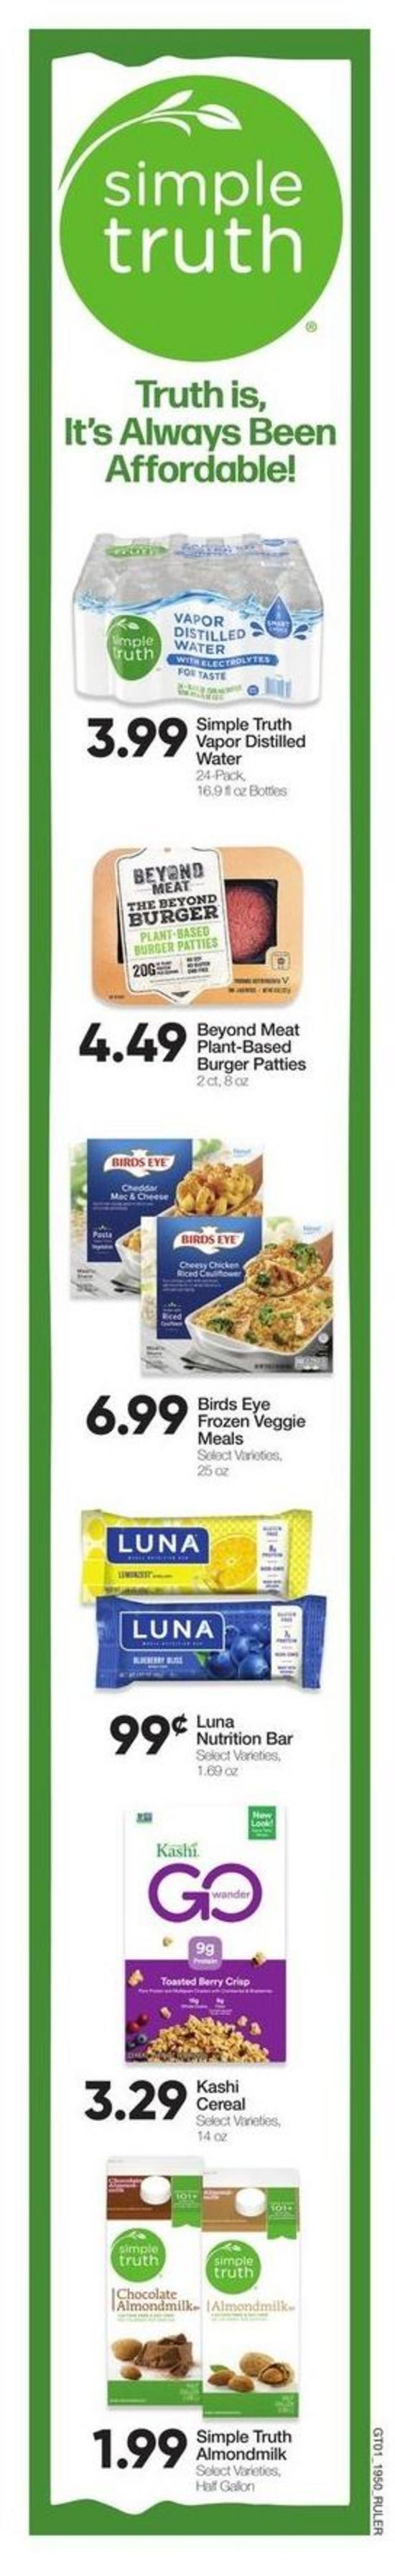 Ruler Foods Weekly Ad from January 16